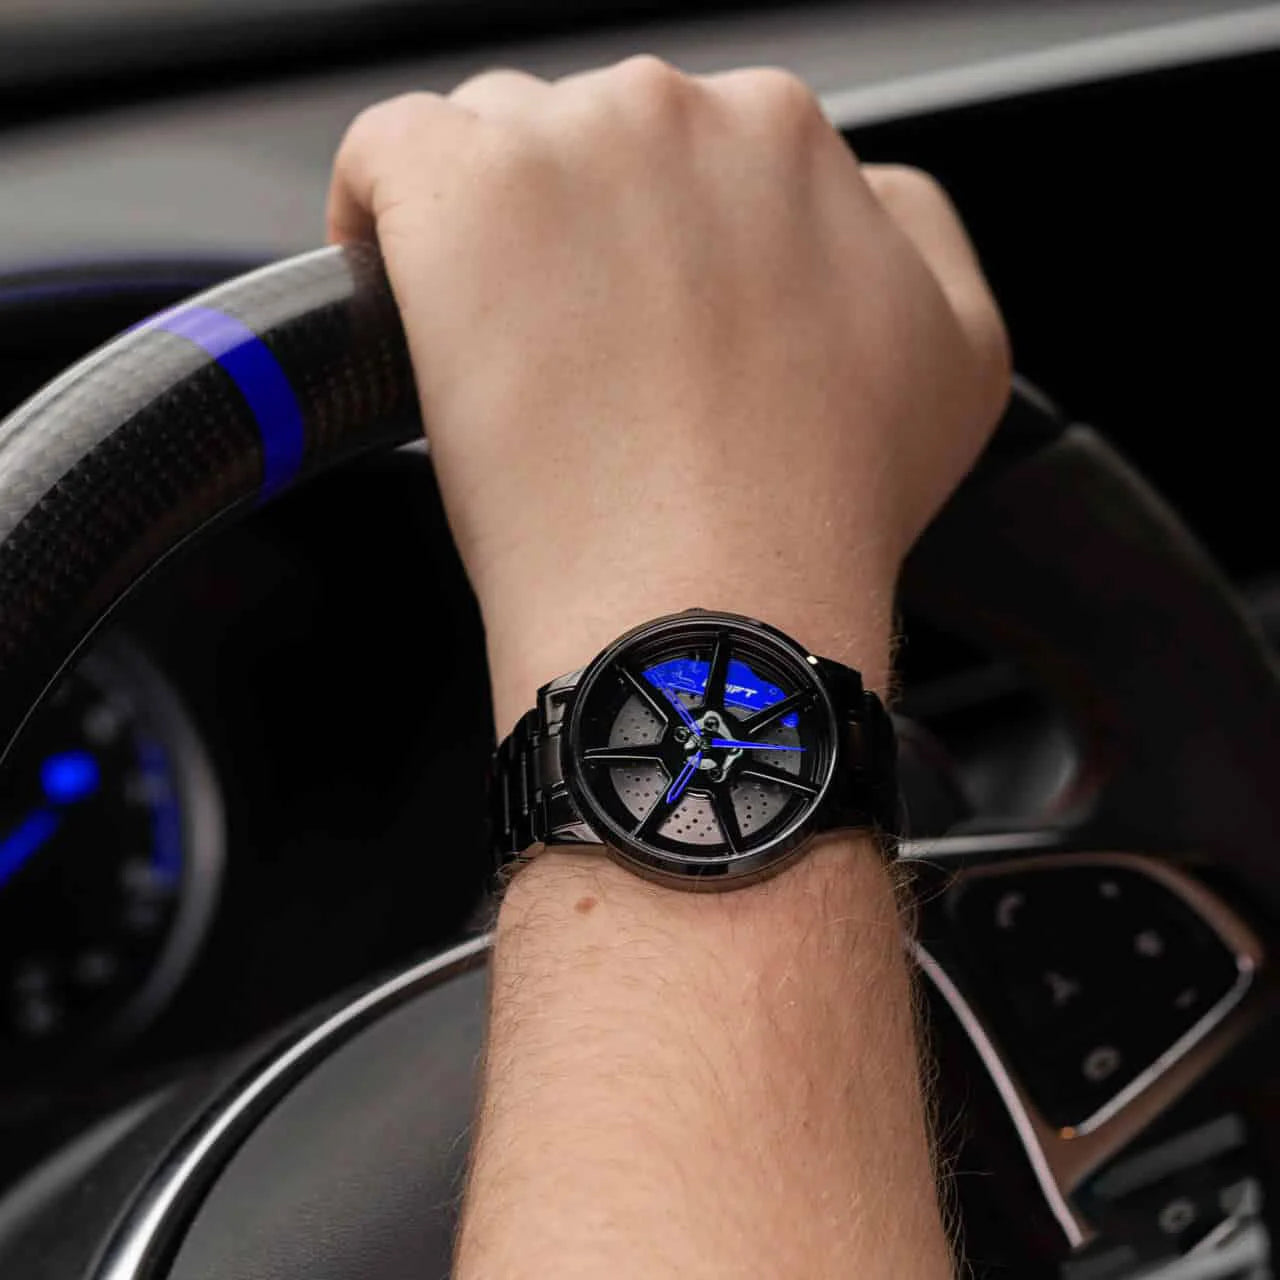 Elevate your sophistication with our blue Drift Rim Watch! Handcrafted by a German startup, these precision watches embody innovative design, perfect for igniting the passion of motorsport, tuning, and auto enthusiasts. #id_46744374640970